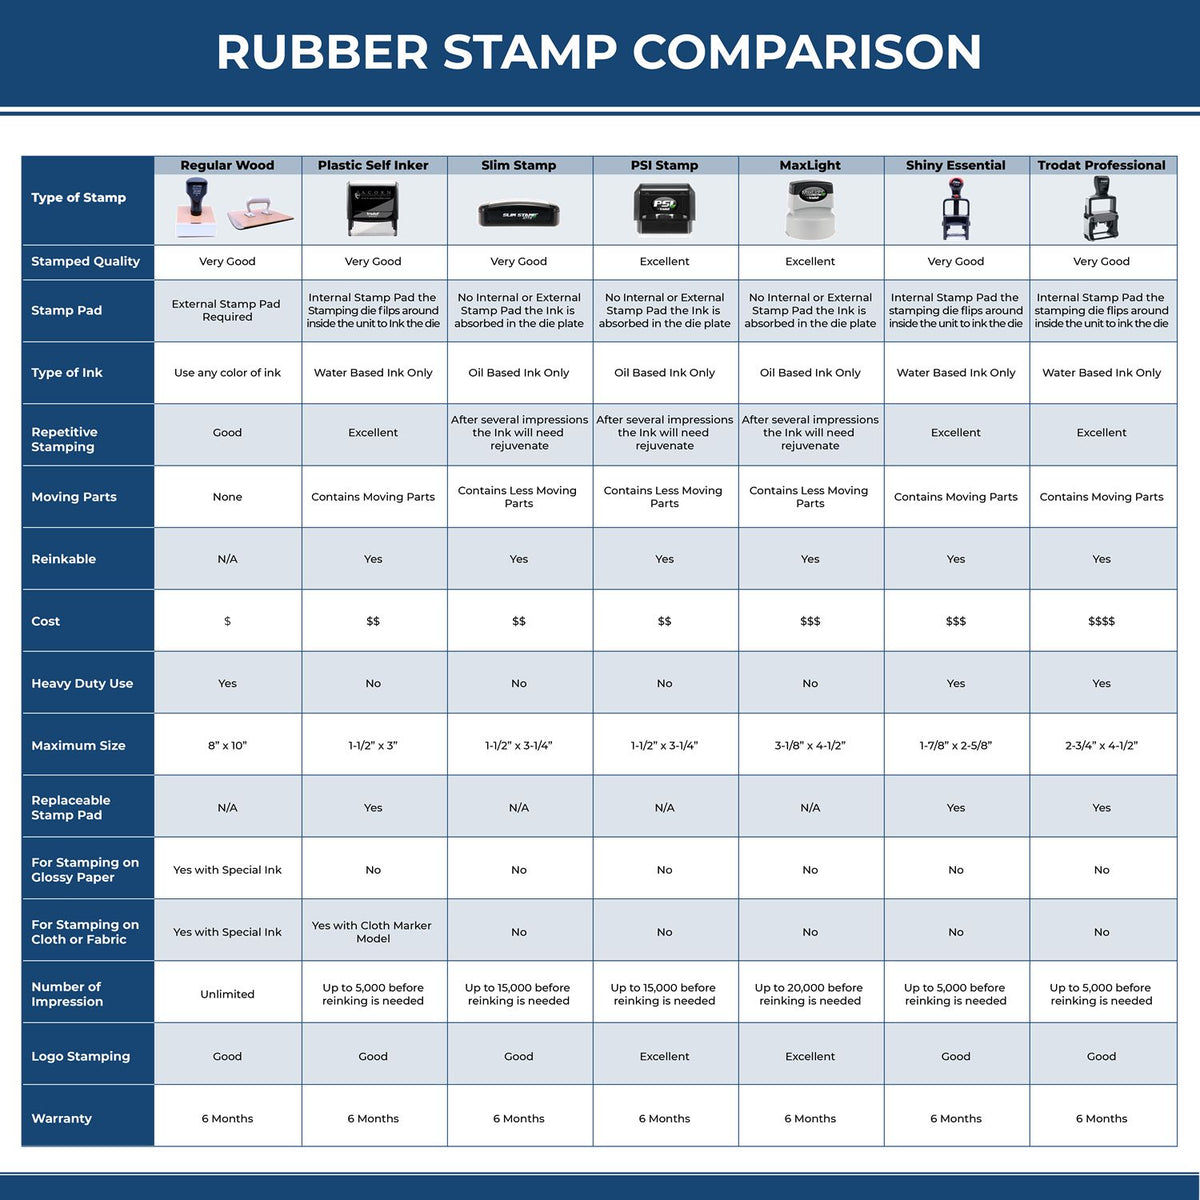 A comparison chart for the different types of mount models available for the PSI Louisiana Notary Stamp.